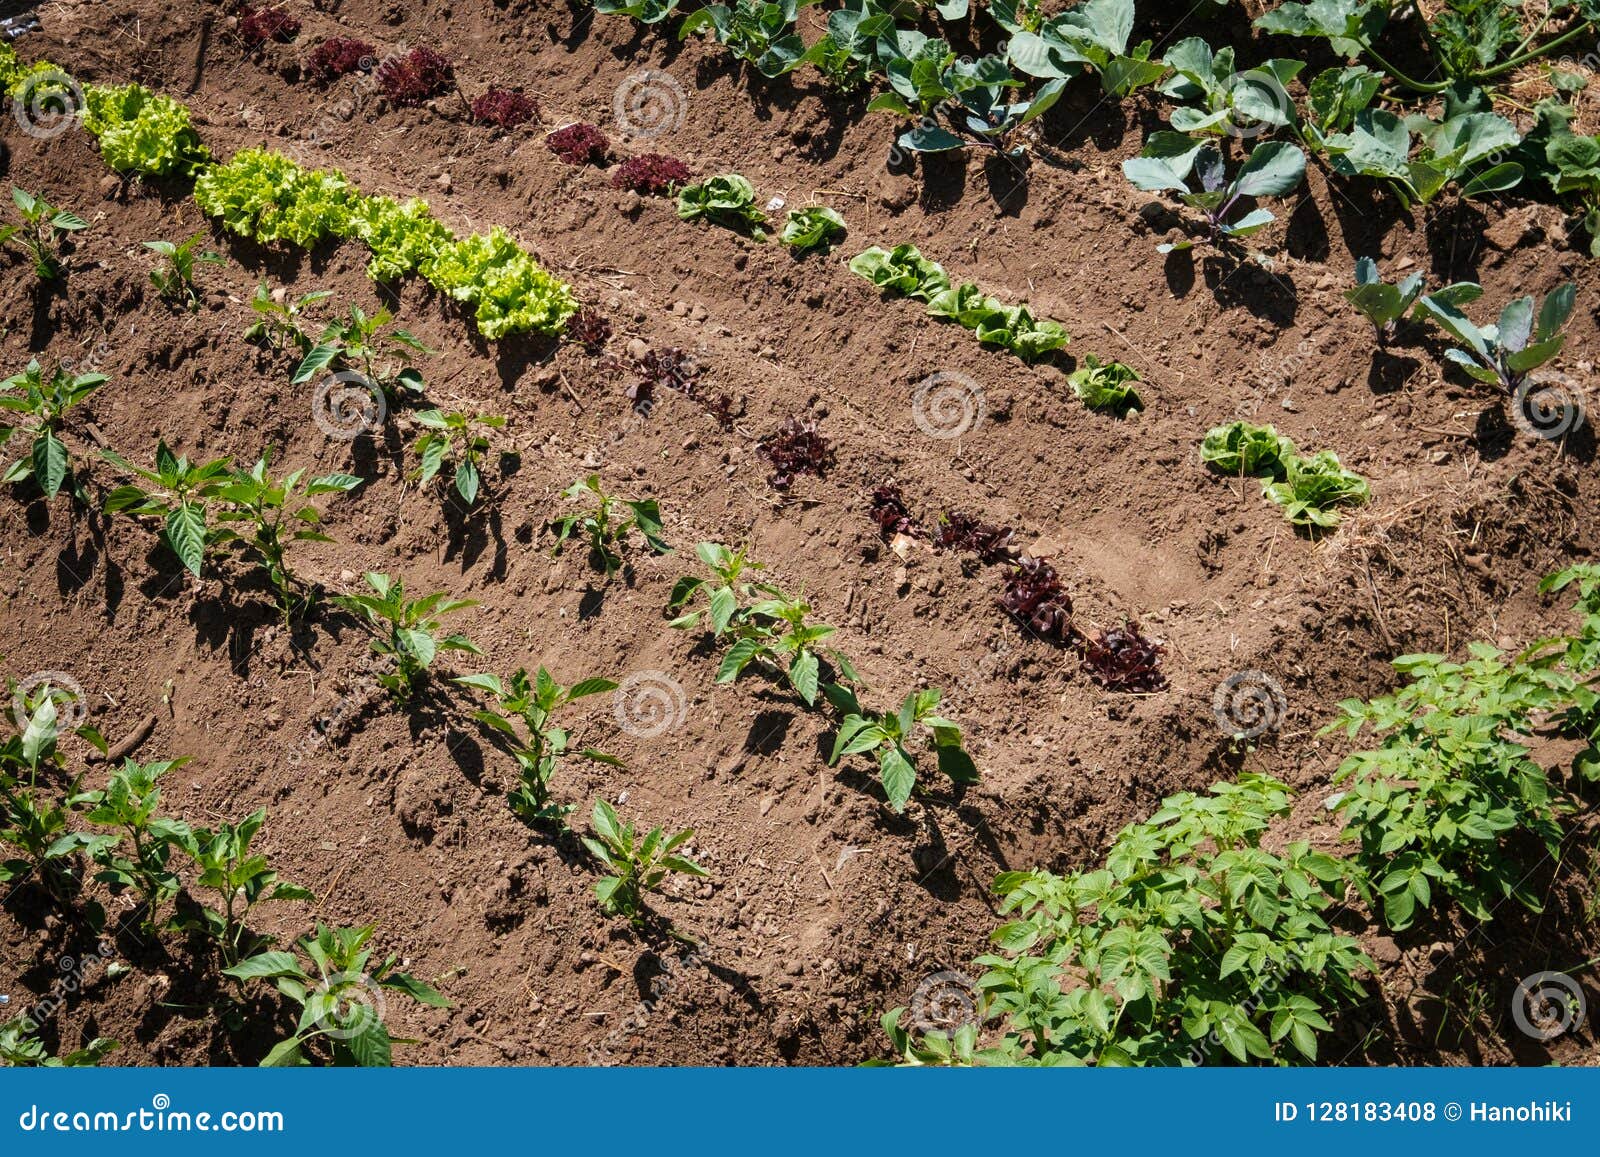 Small Vegetable Plants Growing In Garden Bed Stock Photo Image